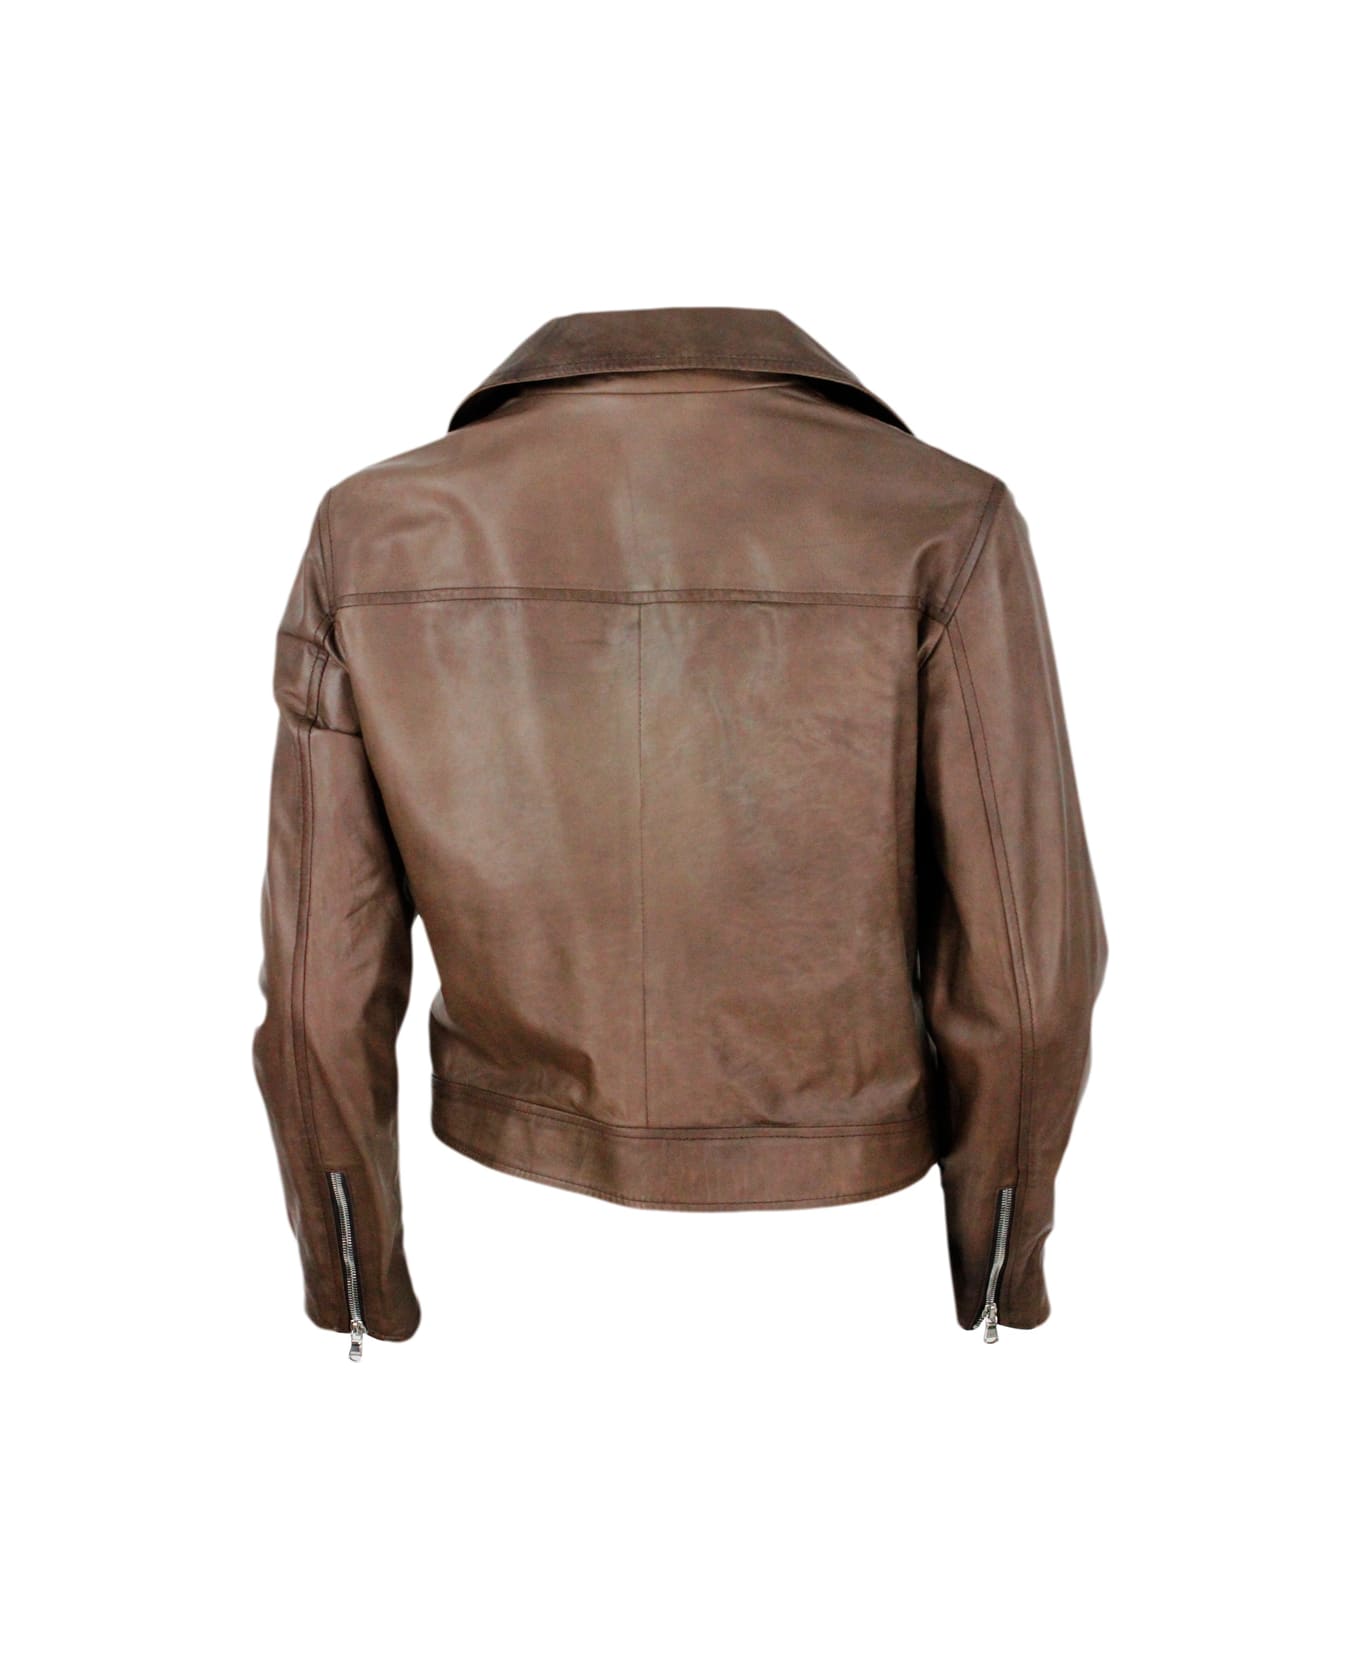 Barba Napoli Studded Jacket In Fine And Soft Nappa Leather With Zip Closure - Brown レザージャケット